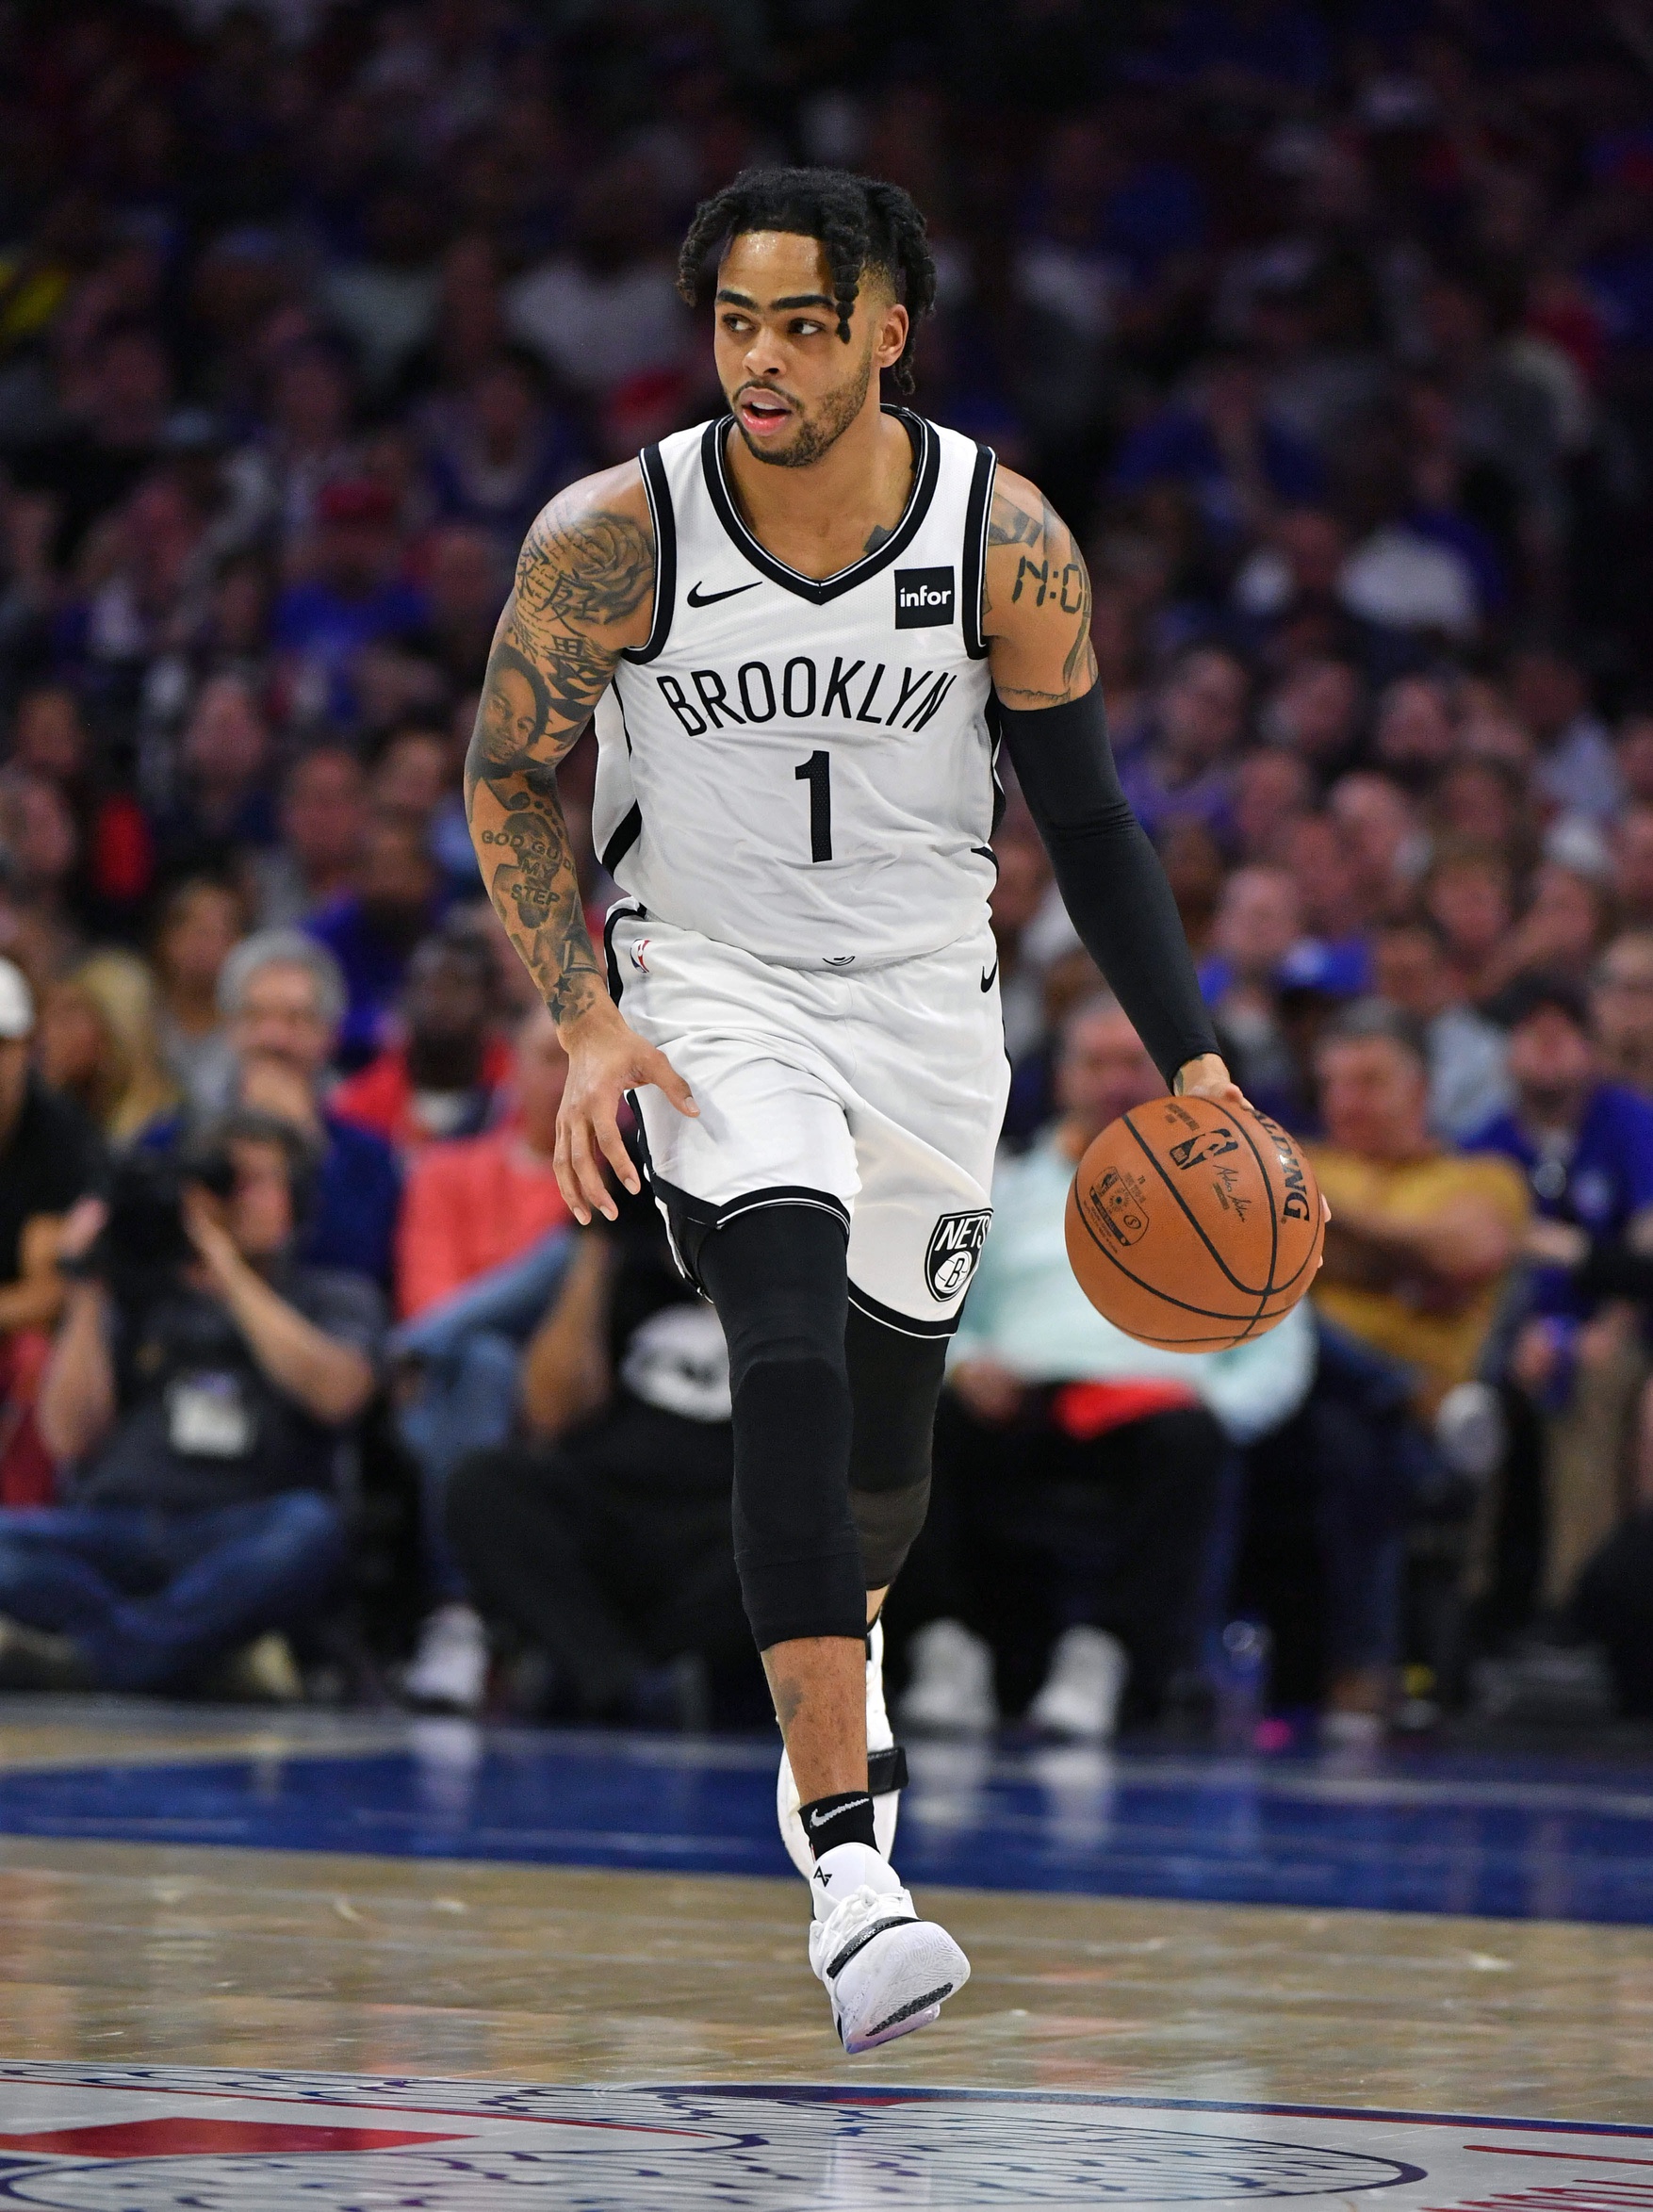 D'Angelo Russell was a huge part of the Brooklyn Nets transition